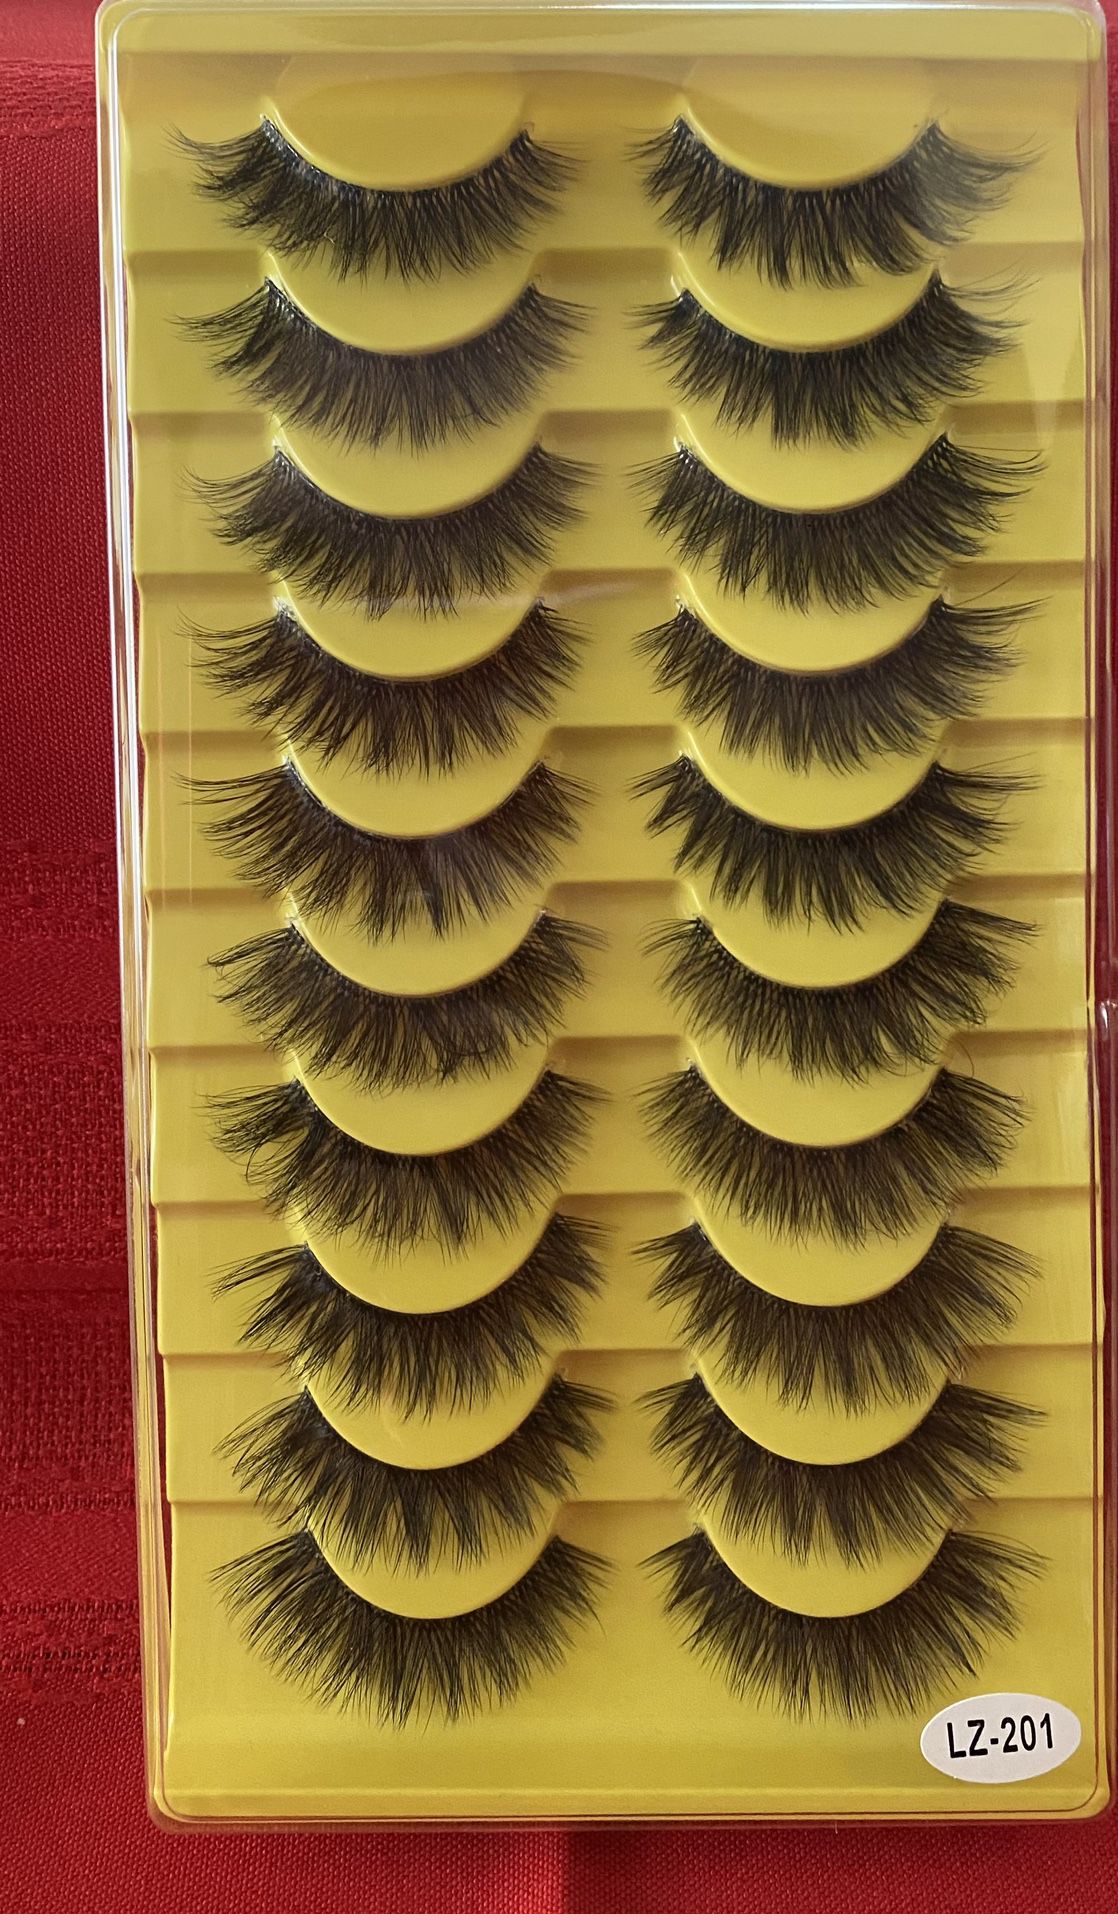 10 Pairs For $10 New Lashes 